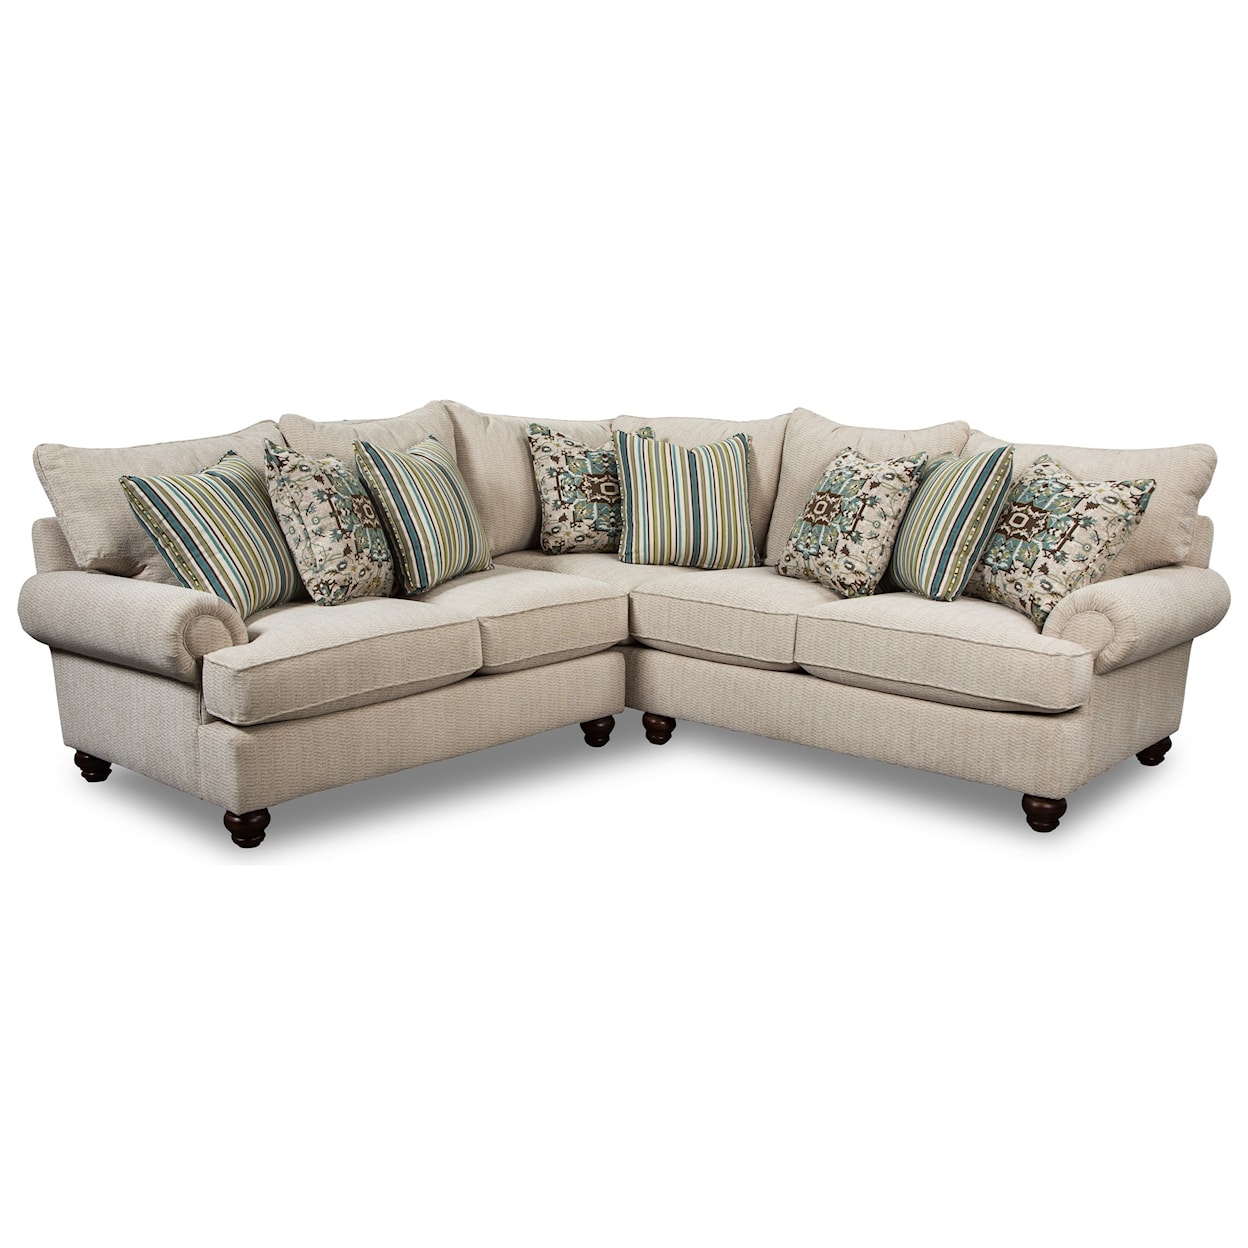 Hickory Craft 797050BD 4-Seat Sectional Sofa